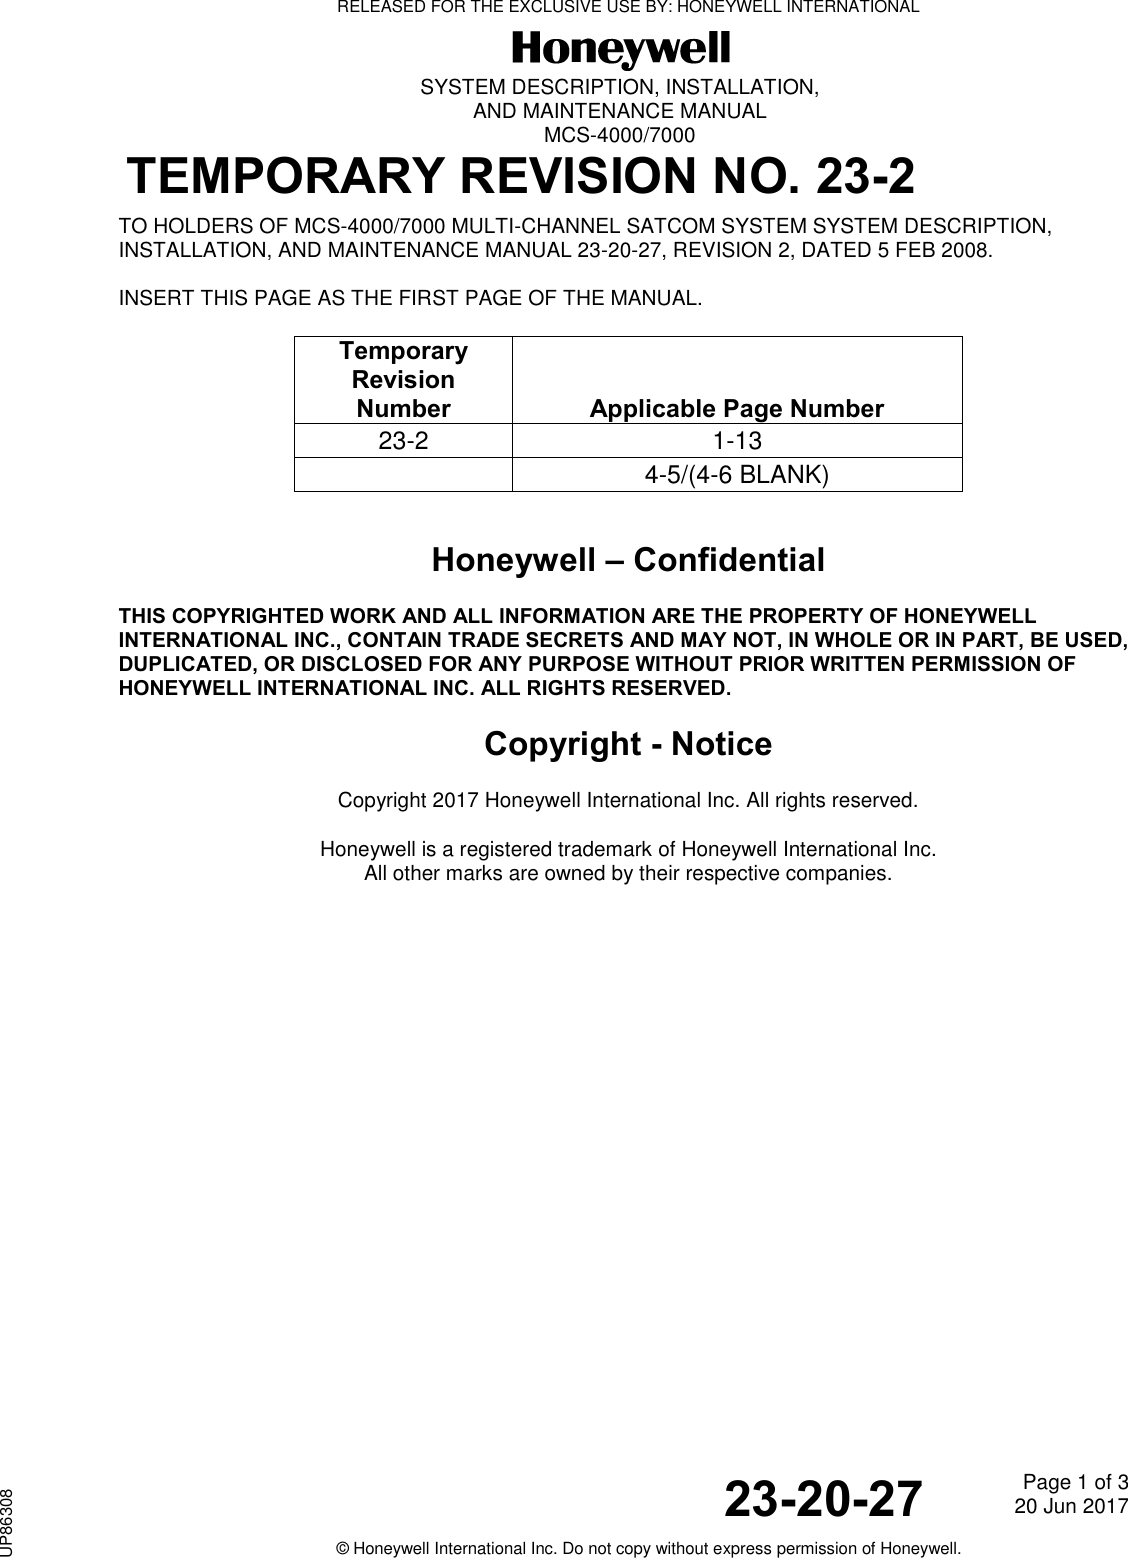   SYSTEM DESCRIPTION, INSTALLATION, AND MAINTENANCE MANUAL MCS-4000/7000  TEMPORARY REVISION NO. 23-2     23-20-27 Page 1 of 3 20 Jun 2017                                                  © Honeywell International Inc. Do not copy without express permission of Honeywell. TO HOLDERS OF MCS-4000/7000 MULTI-CHANNEL SATCOM SYSTEM SYSTEM DESCRIPTION, INSTALLATION, AND MAINTENANCE MANUAL 23-20-27, REVISION 2, DATED 5 FEB 2008. INSERT THIS PAGE AS THE FIRST PAGE OF THE MANUAL.  Temporary Revision Number   Applicable Page Number 23-2 1-13  4-5/(4-6 BLANK)  Honeywell – Confidential THIS COPYRIGHTED WORK AND ALL INFORMATION ARE THE PROPERTY OF HONEYWELL INTERNATIONAL INC., CONTAIN TRADE SECRETS AND MAY NOT, IN WHOLE OR IN PART, BE USED, DUPLICATED, OR DISCLOSED FOR ANY PURPOSE WITHOUT PRIOR WRITTEN PERMISSION OF HONEYWELL INTERNATIONAL INC. ALL RIGHTS RESERVED.  Copyright - Notice Copyright 2017 Honeywell International Inc. All rights reserved. Honeywell is a registered trademark of Honeywell International Inc. All other marks are owned by their respective companies.    RELEASED FOR THE EXCLUSIVE USE BY: HONEYWELL INTERNATIONALUP86308